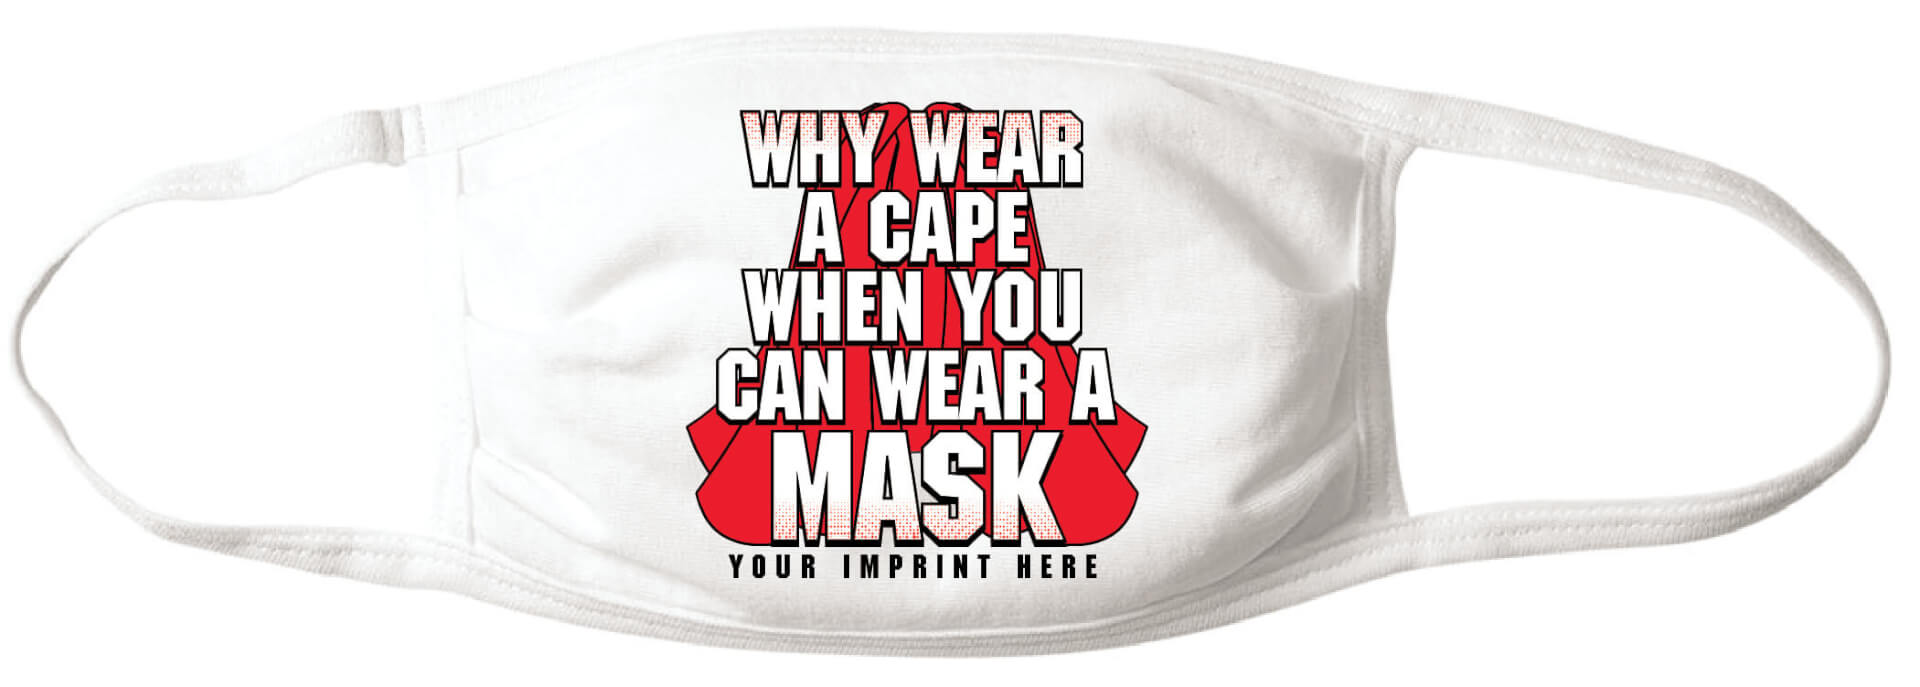 Why Wear A Cape When You Can Wear A Mask - Customizable